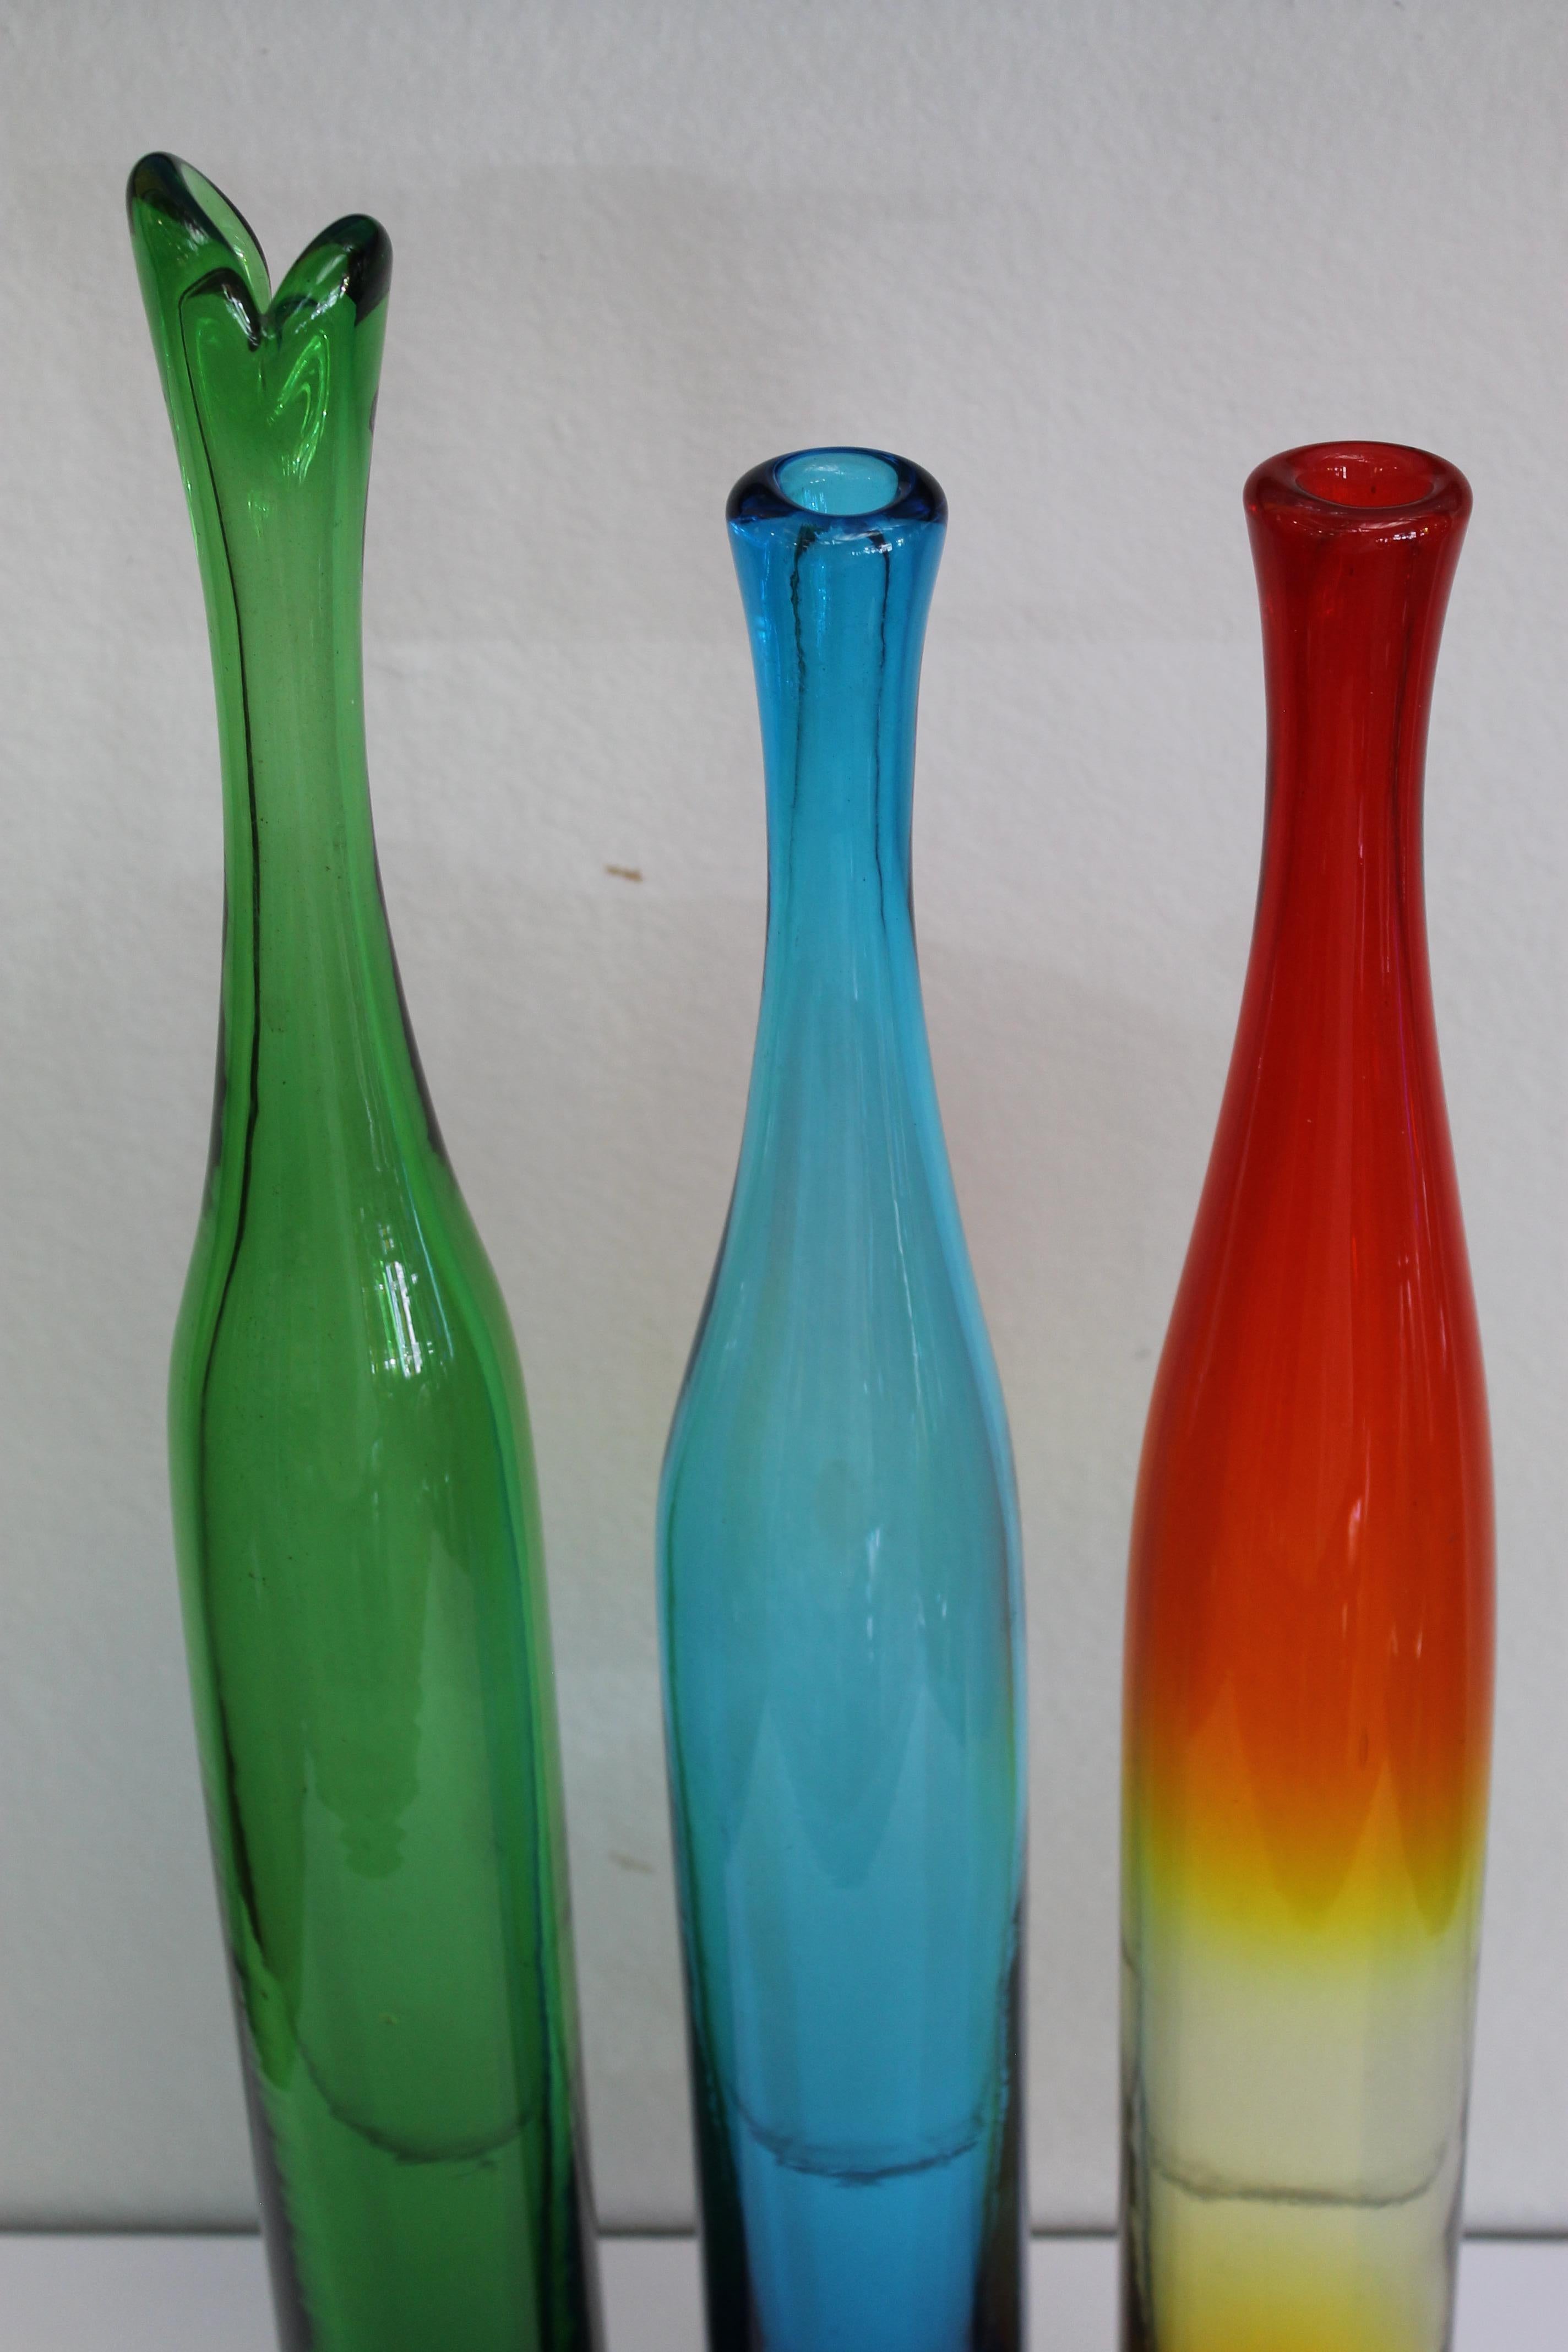 Three Joel Myers colored glass vases, model no. 6427, 1960s. Manufactured by Blenko. The tallest vase is 23.75